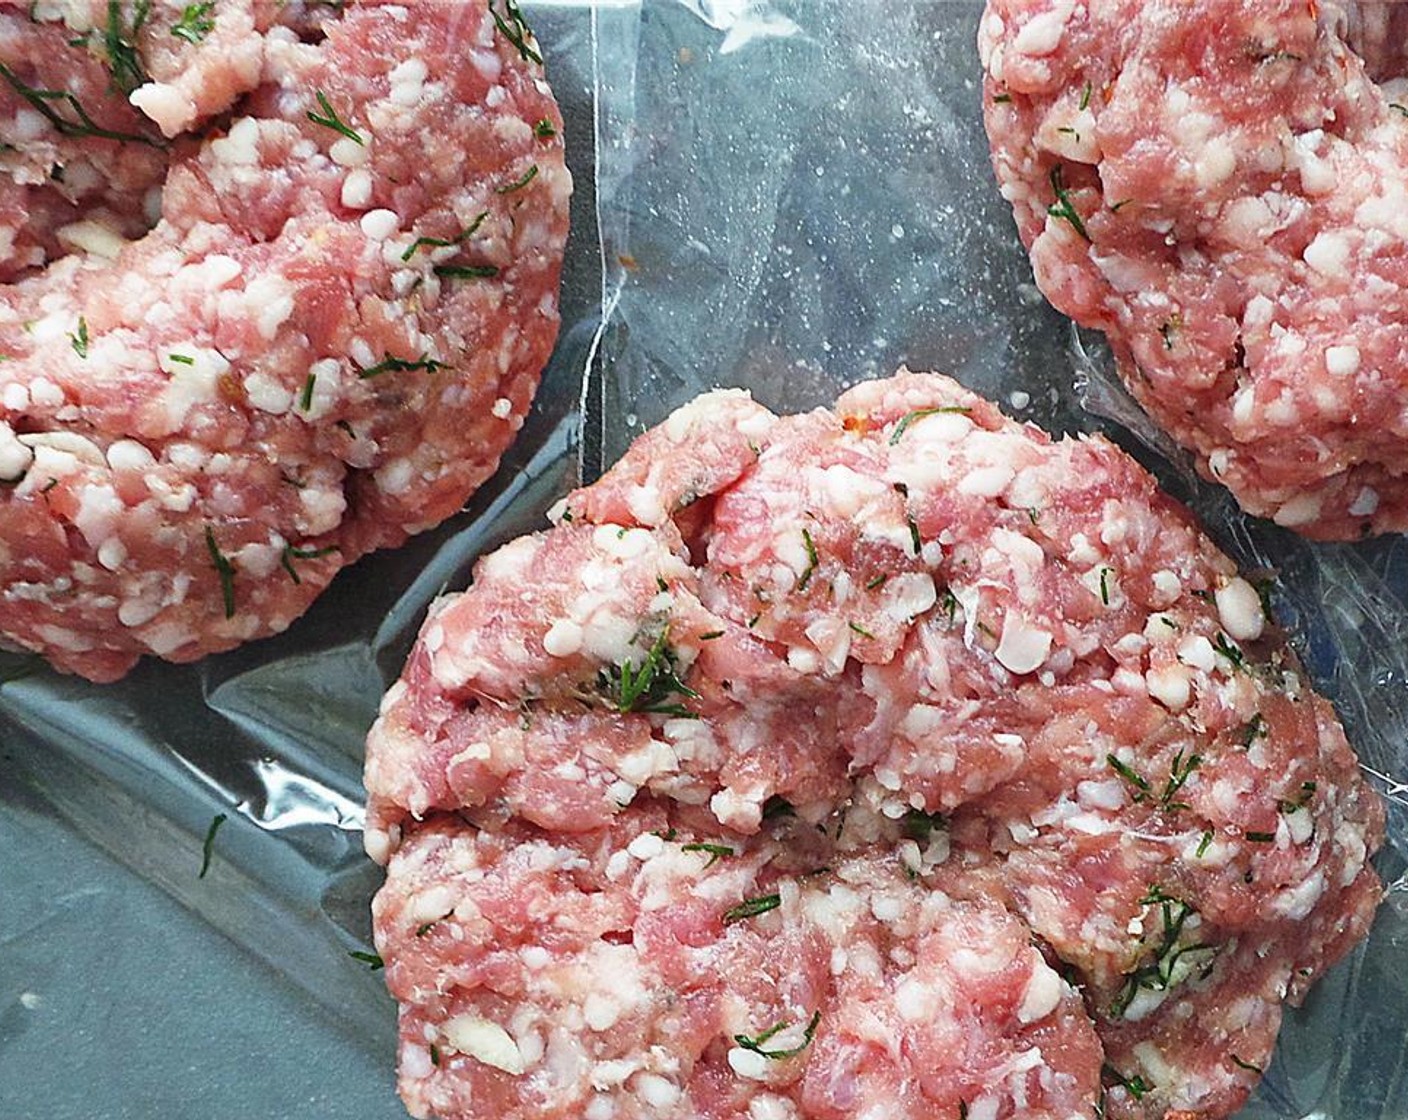 step 3 Scoop a fourth of the meat and form it into a burger. With your thumb, make an indent on the top of the patty. Transfer to a plate and repeat for the next three patties. Place the patties in the fridge for 30 minutes to one hour.